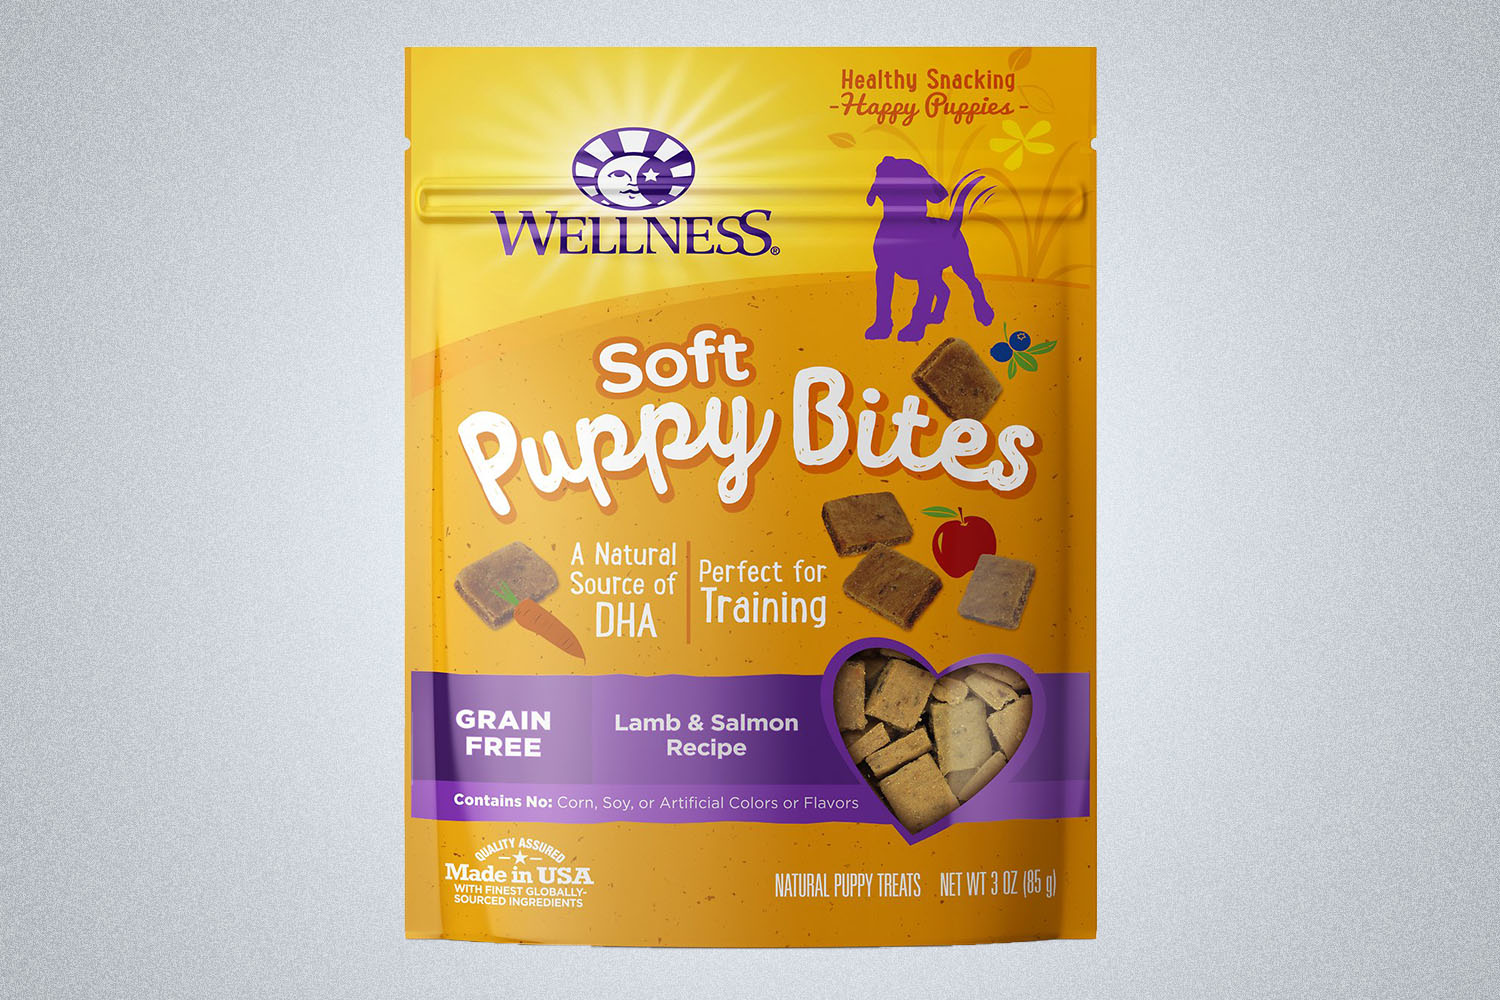 a package of Wellness puppy bite dog treats on a grey background